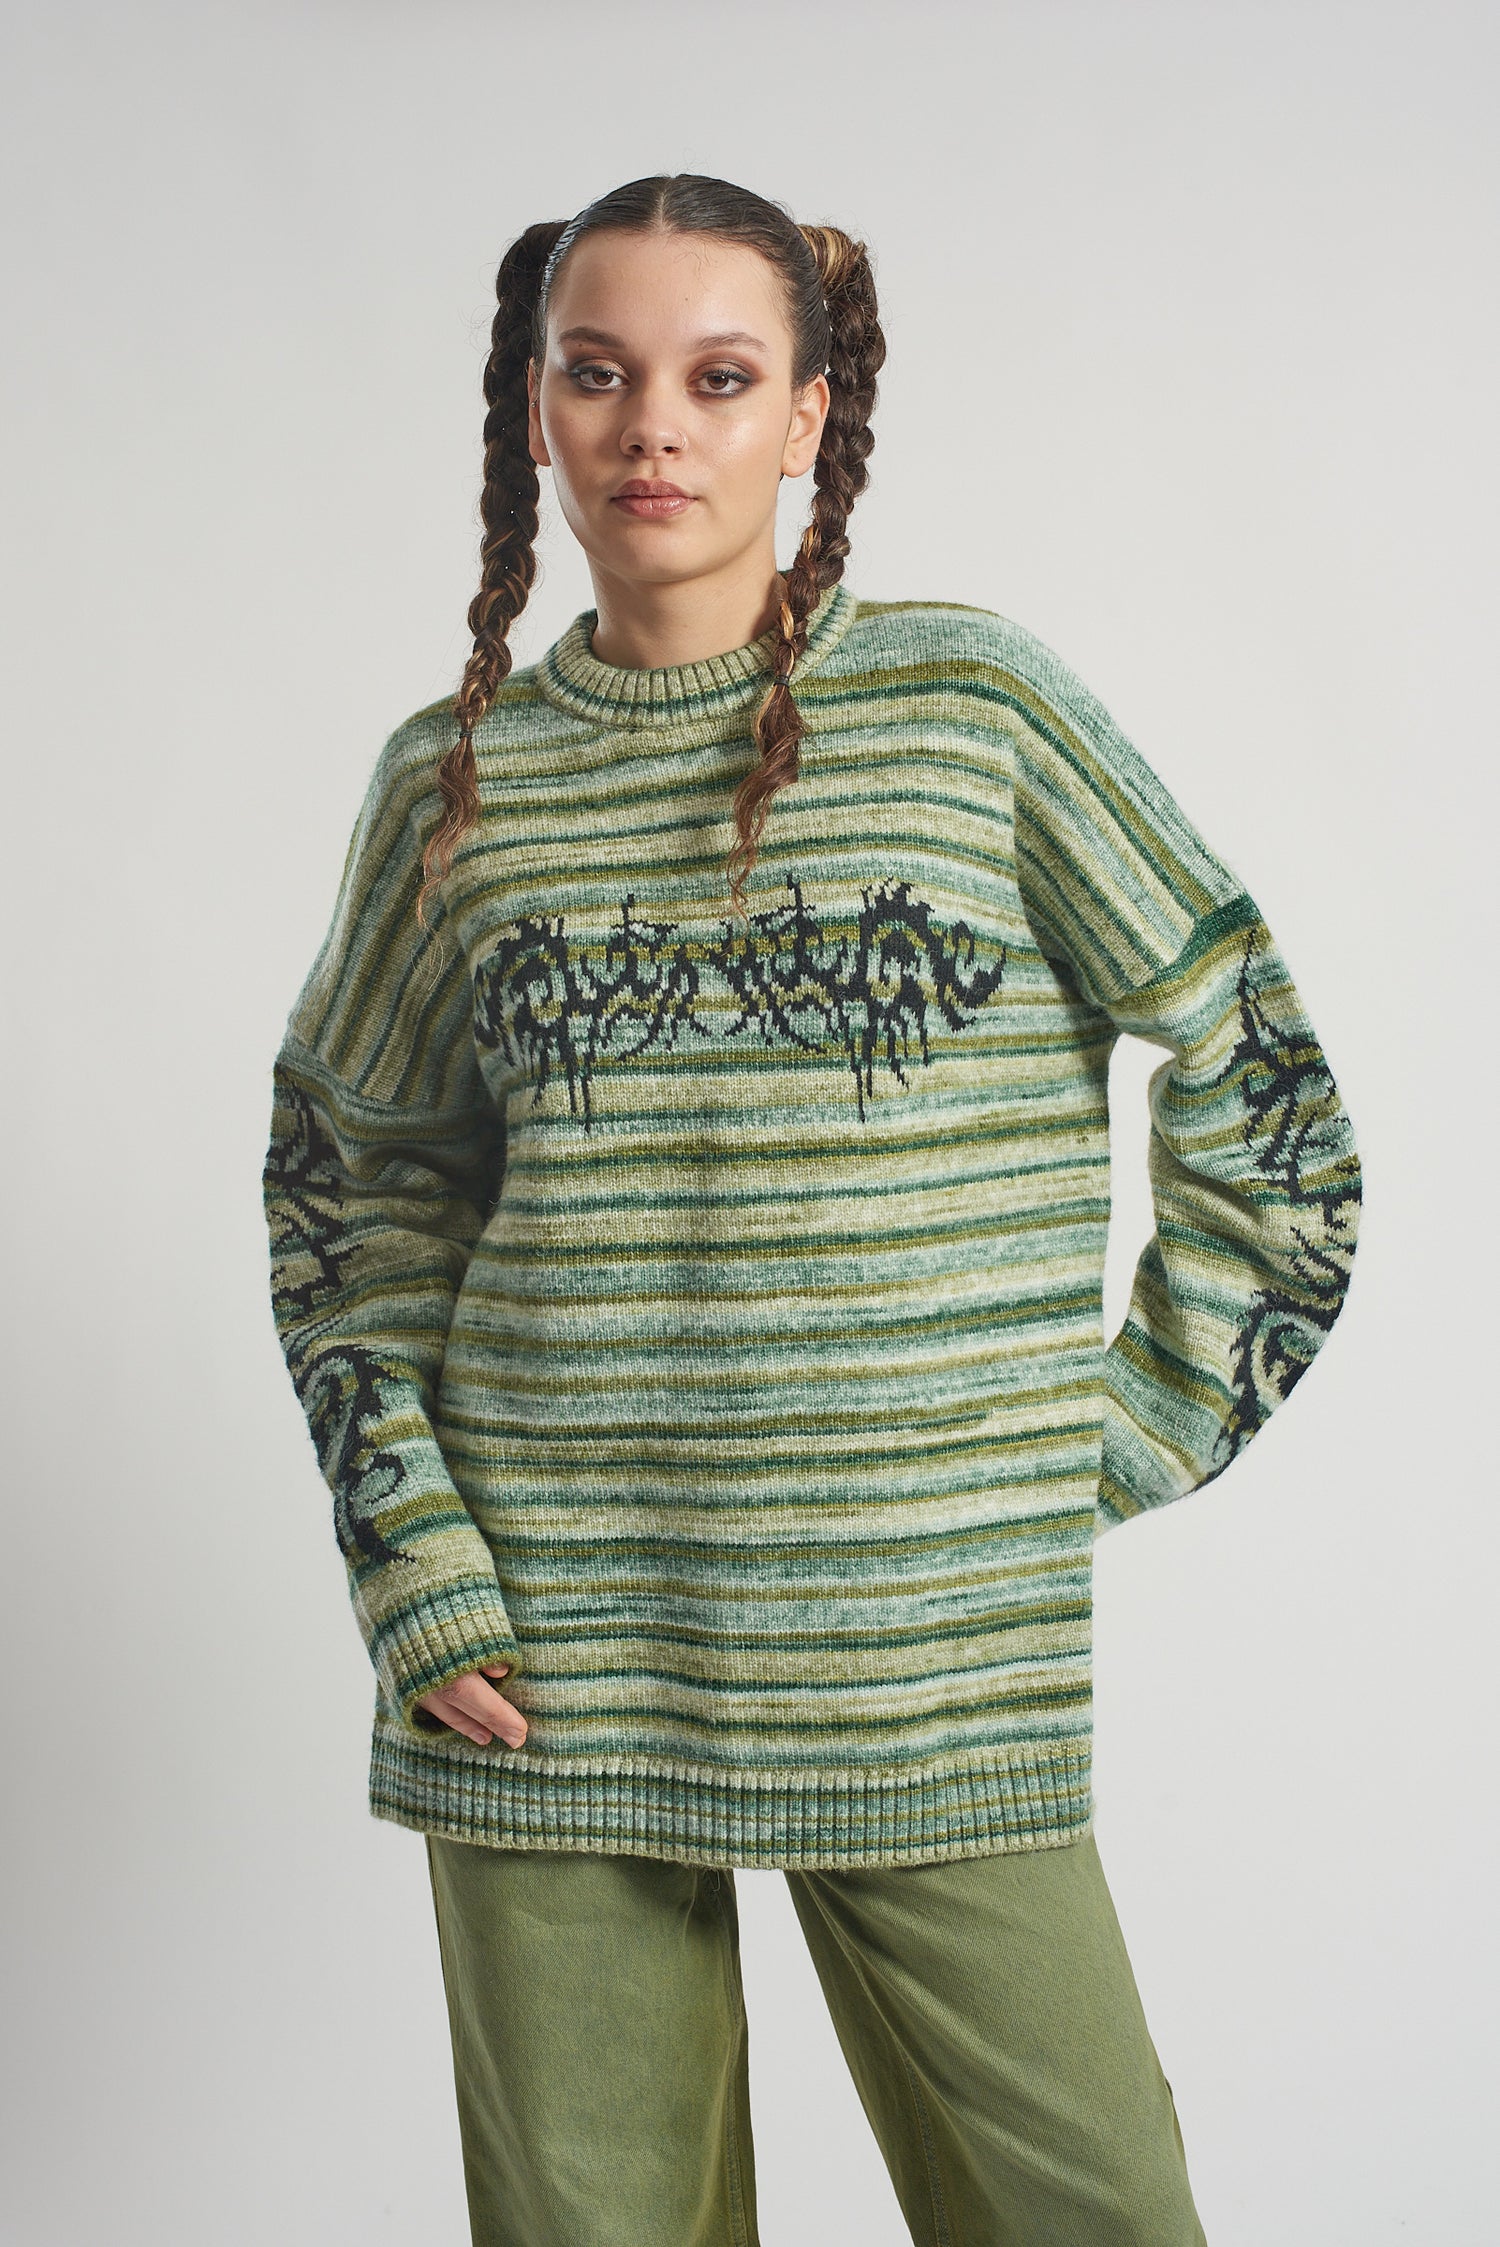 Buy The Ragged Priest Spacedye Nano Knit Jumper Online - Price Match Promise